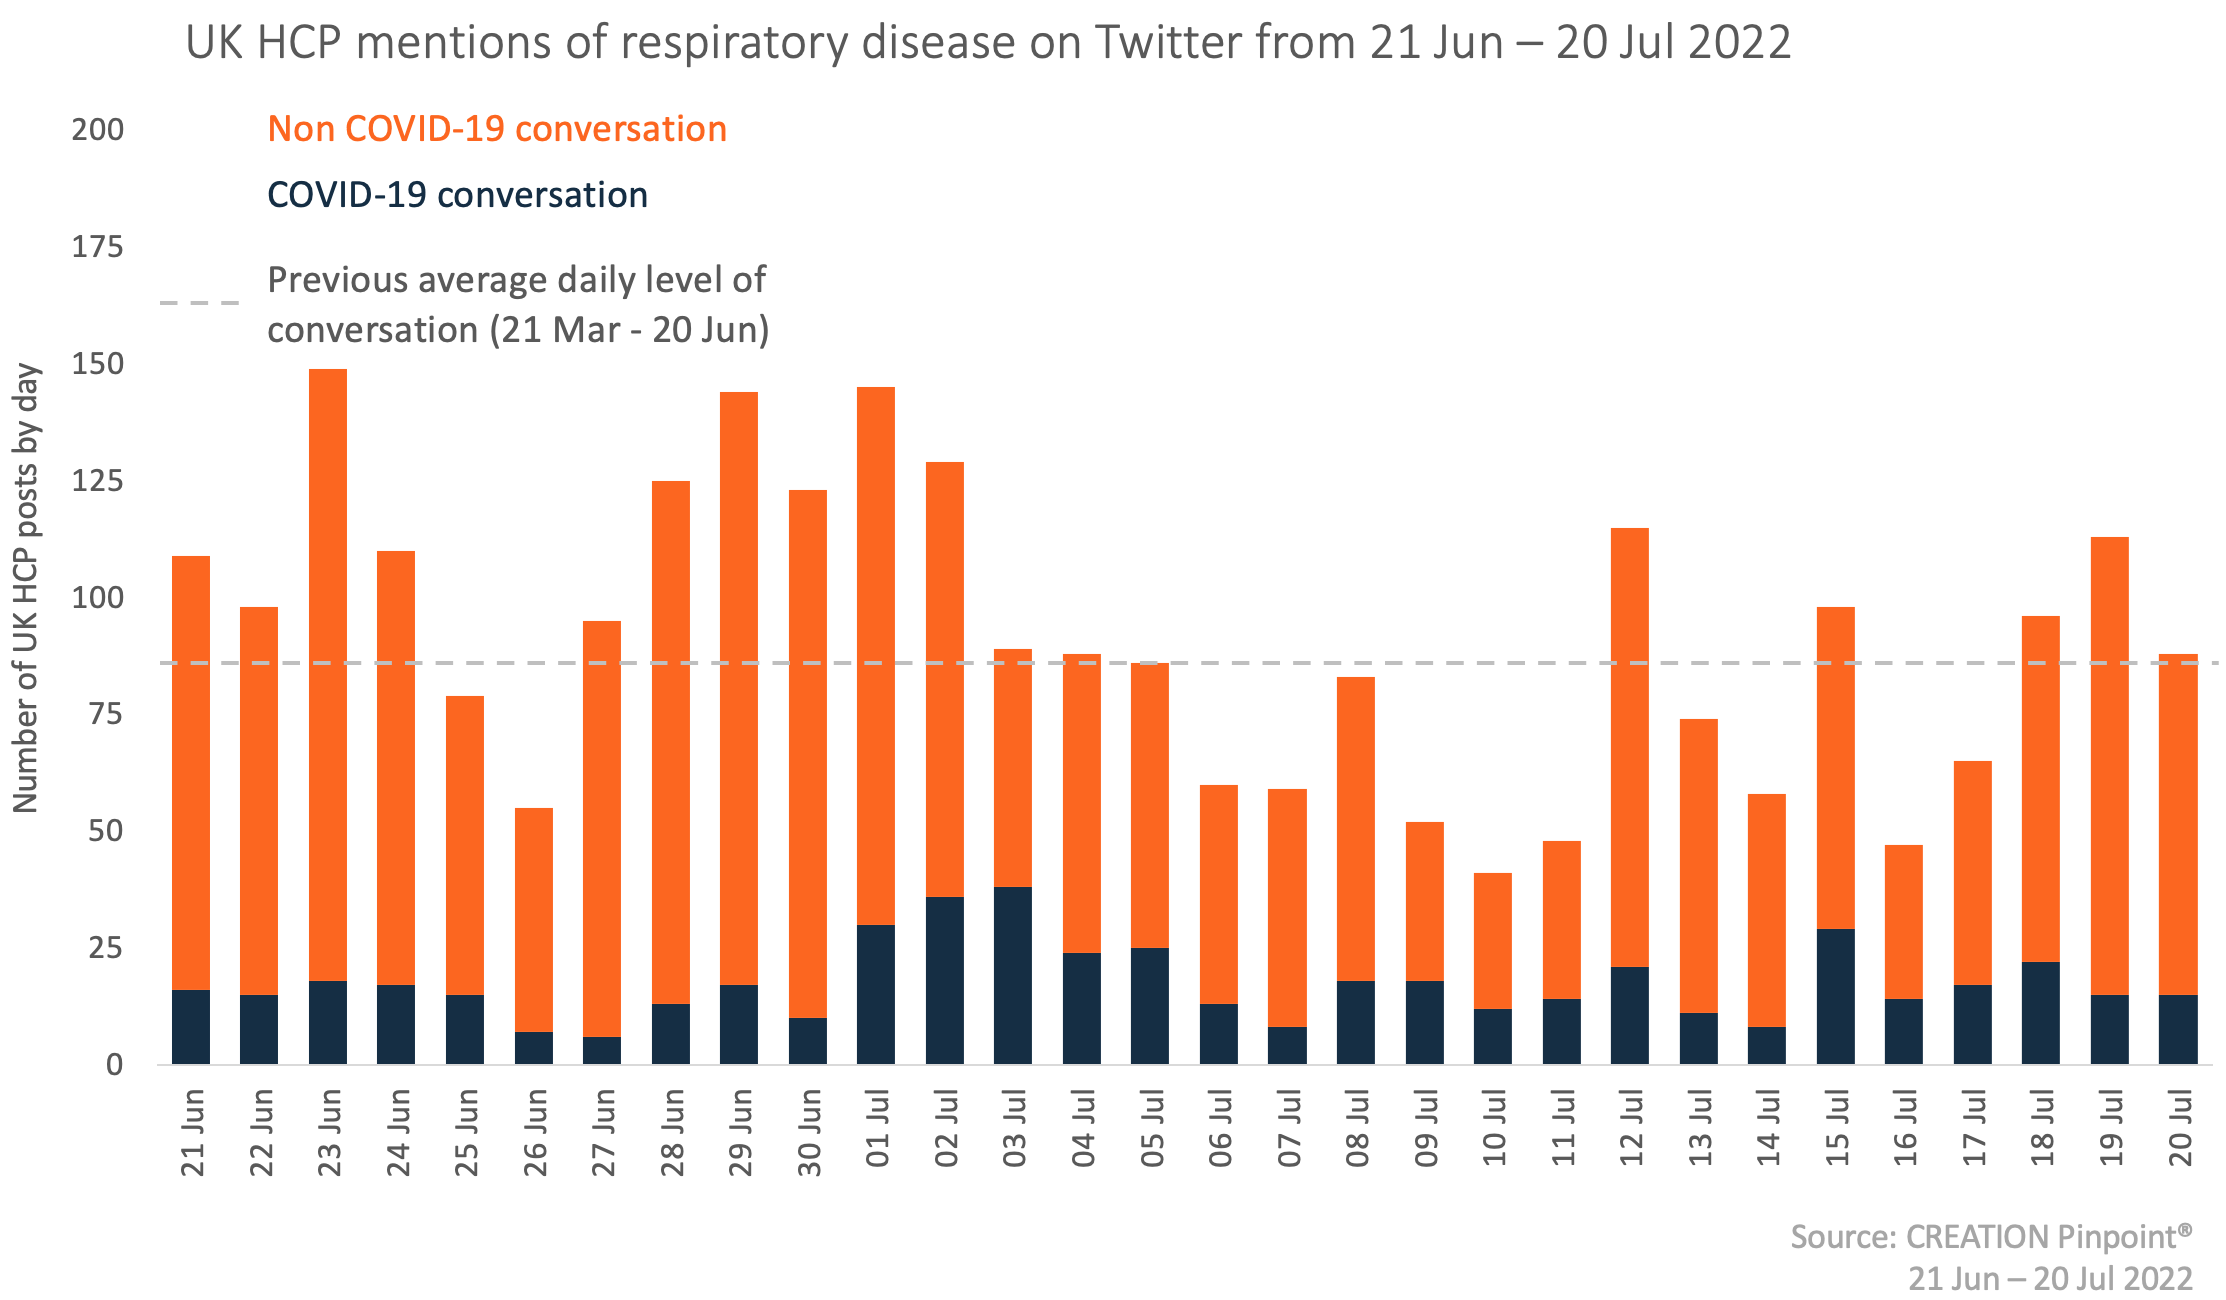 Graph Showing UK HCP Mentions of respiratory disease on Twitter from 21 Jun - 20 Jul 2022